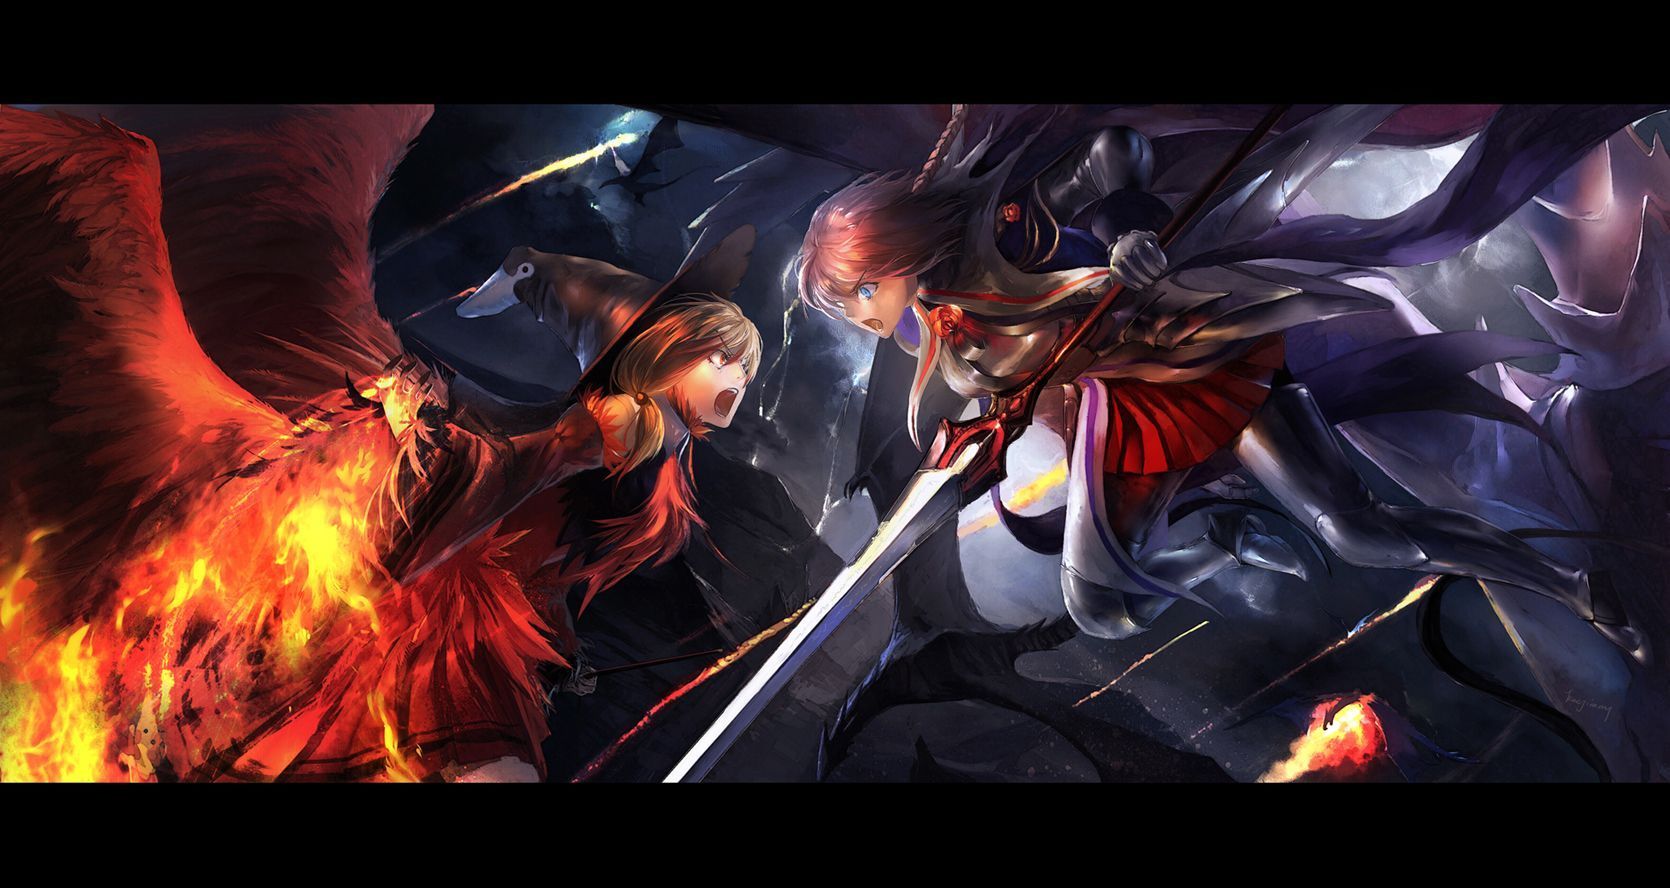 Epic Anime Fighting Wallpaper High Definition. Anime background, Anime, Cool anime wallpaper